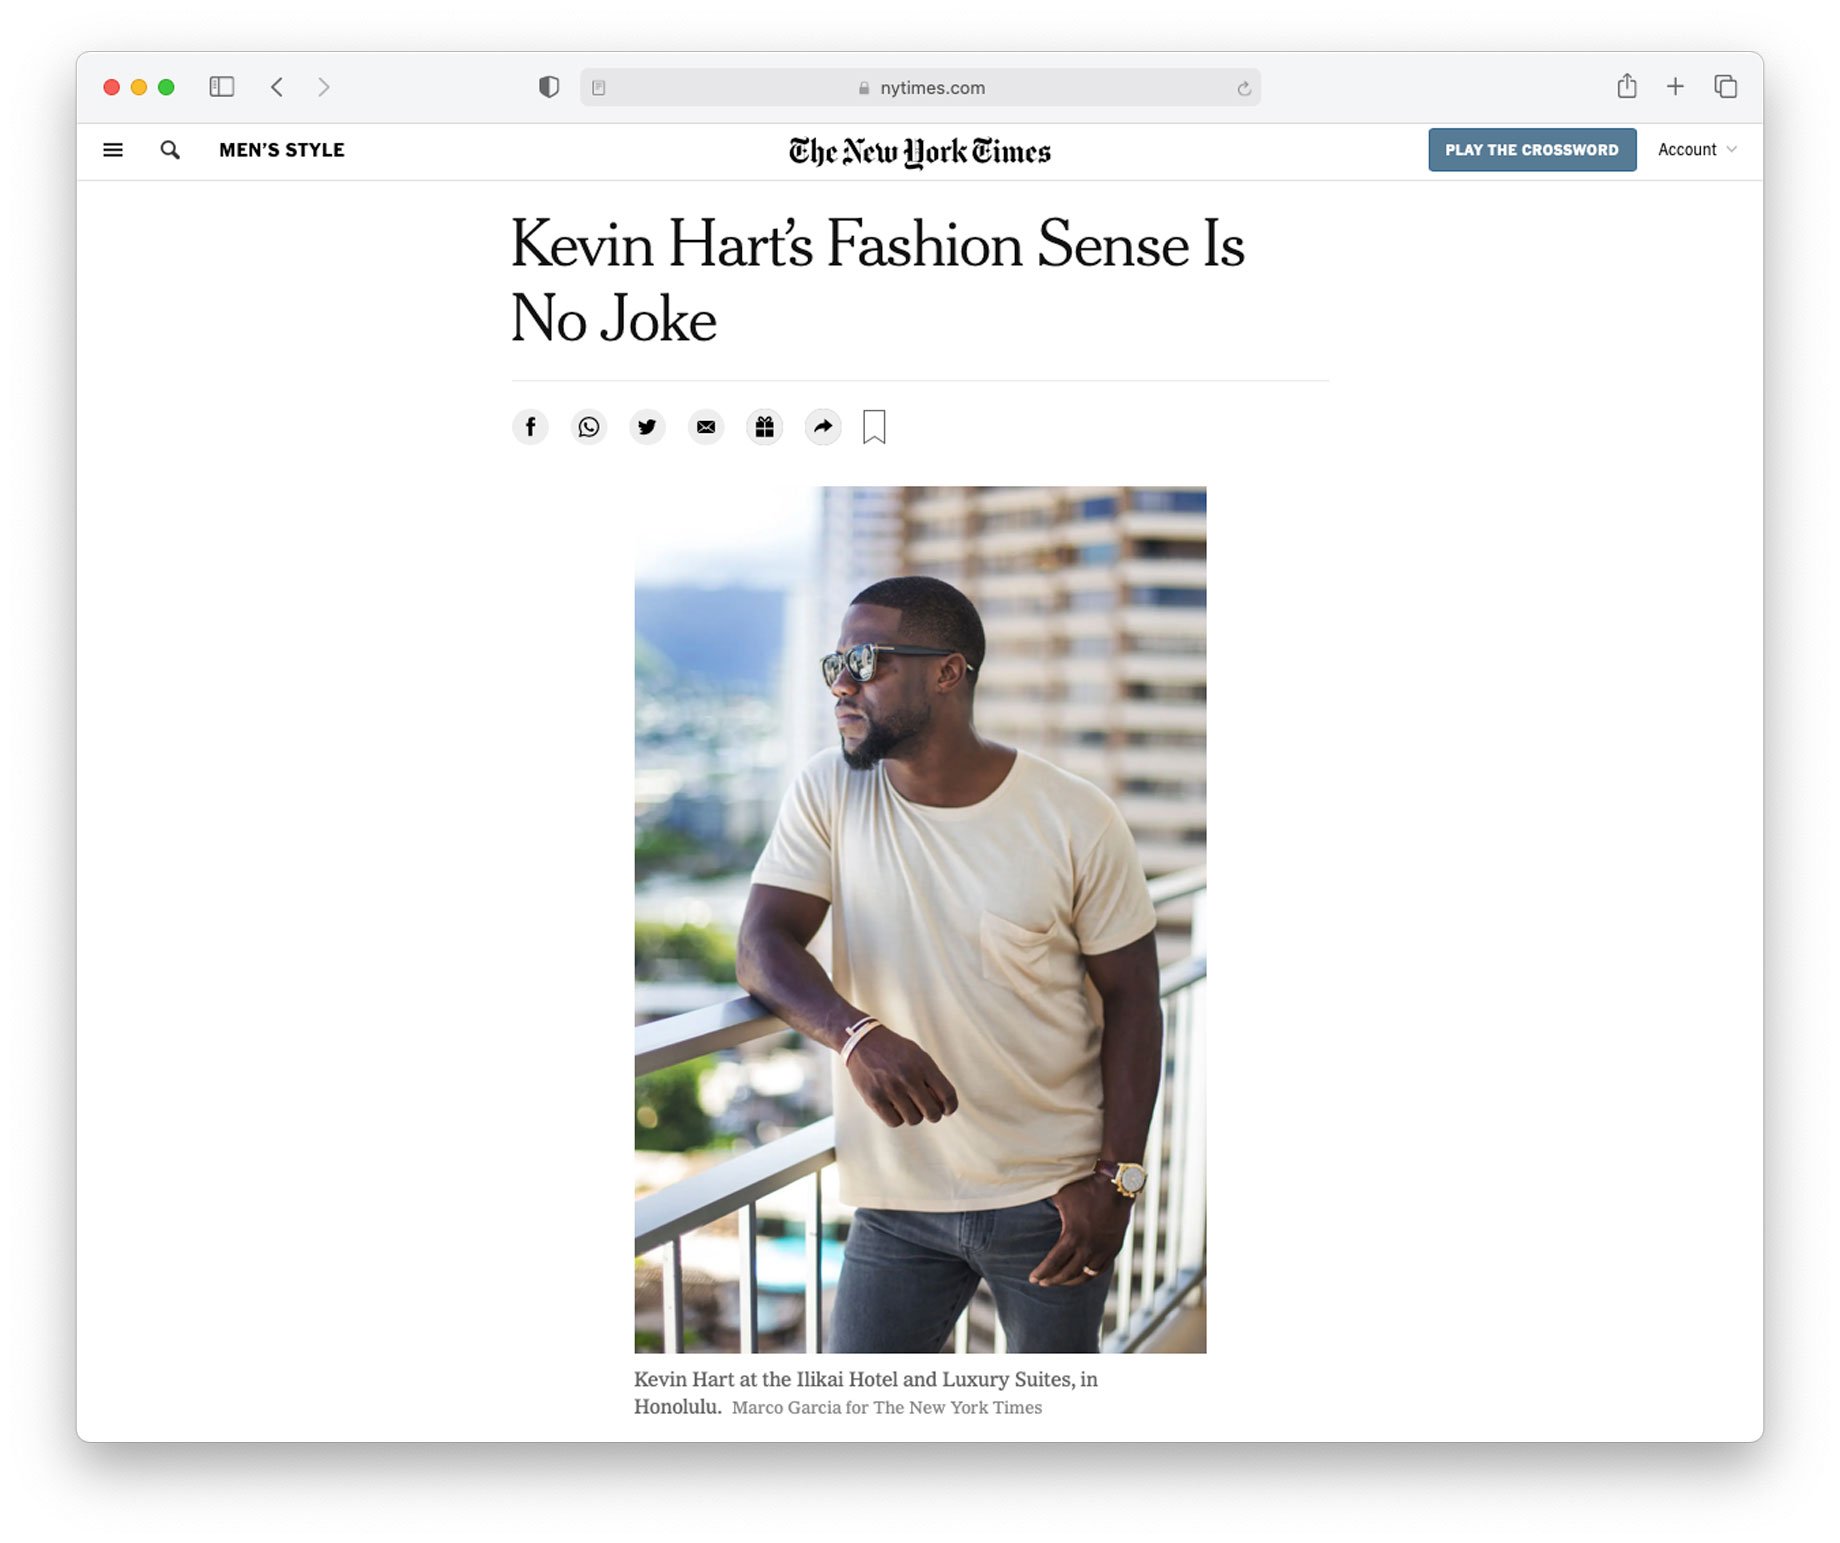 tearsheet of Kevin Hart at the ilikai hotel in hawaii shot by Marco Garcia for the new york times